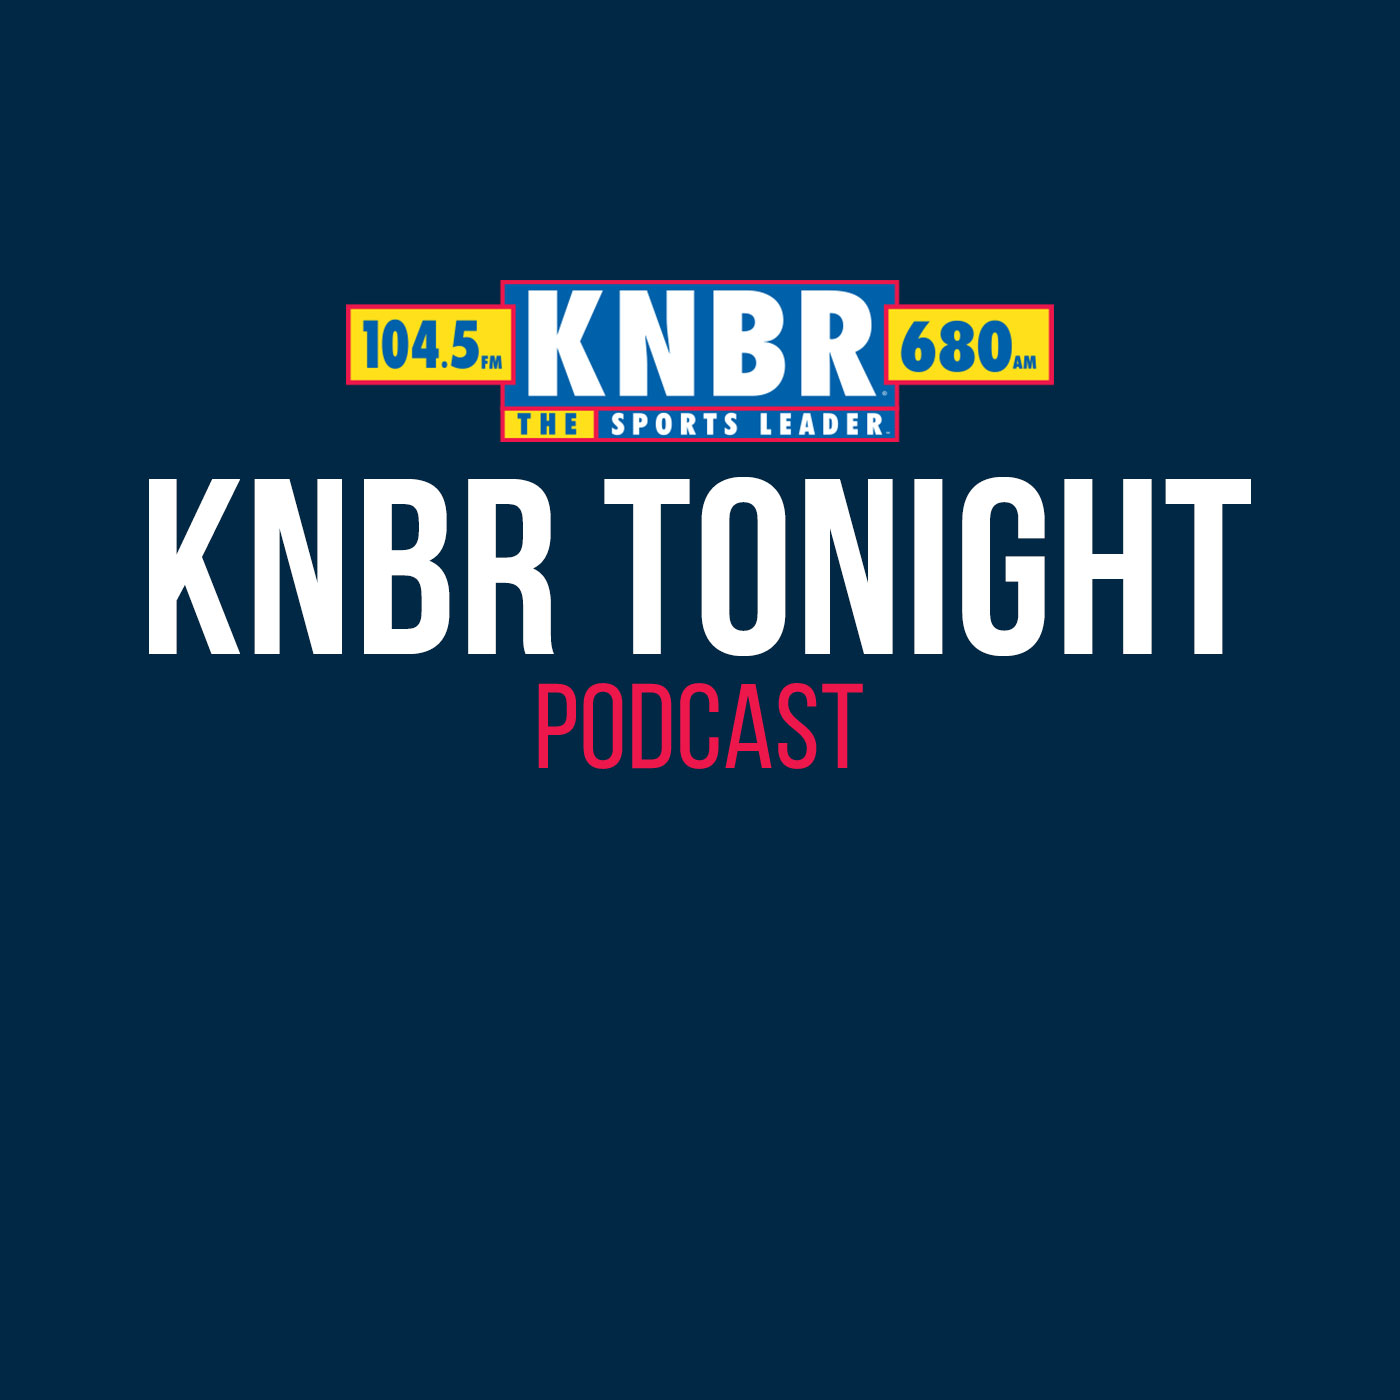 10-17 Danny Emerman joins KNBR Tonight with FP to preview the Warriors' 2022 ring night celebration tomorrow night